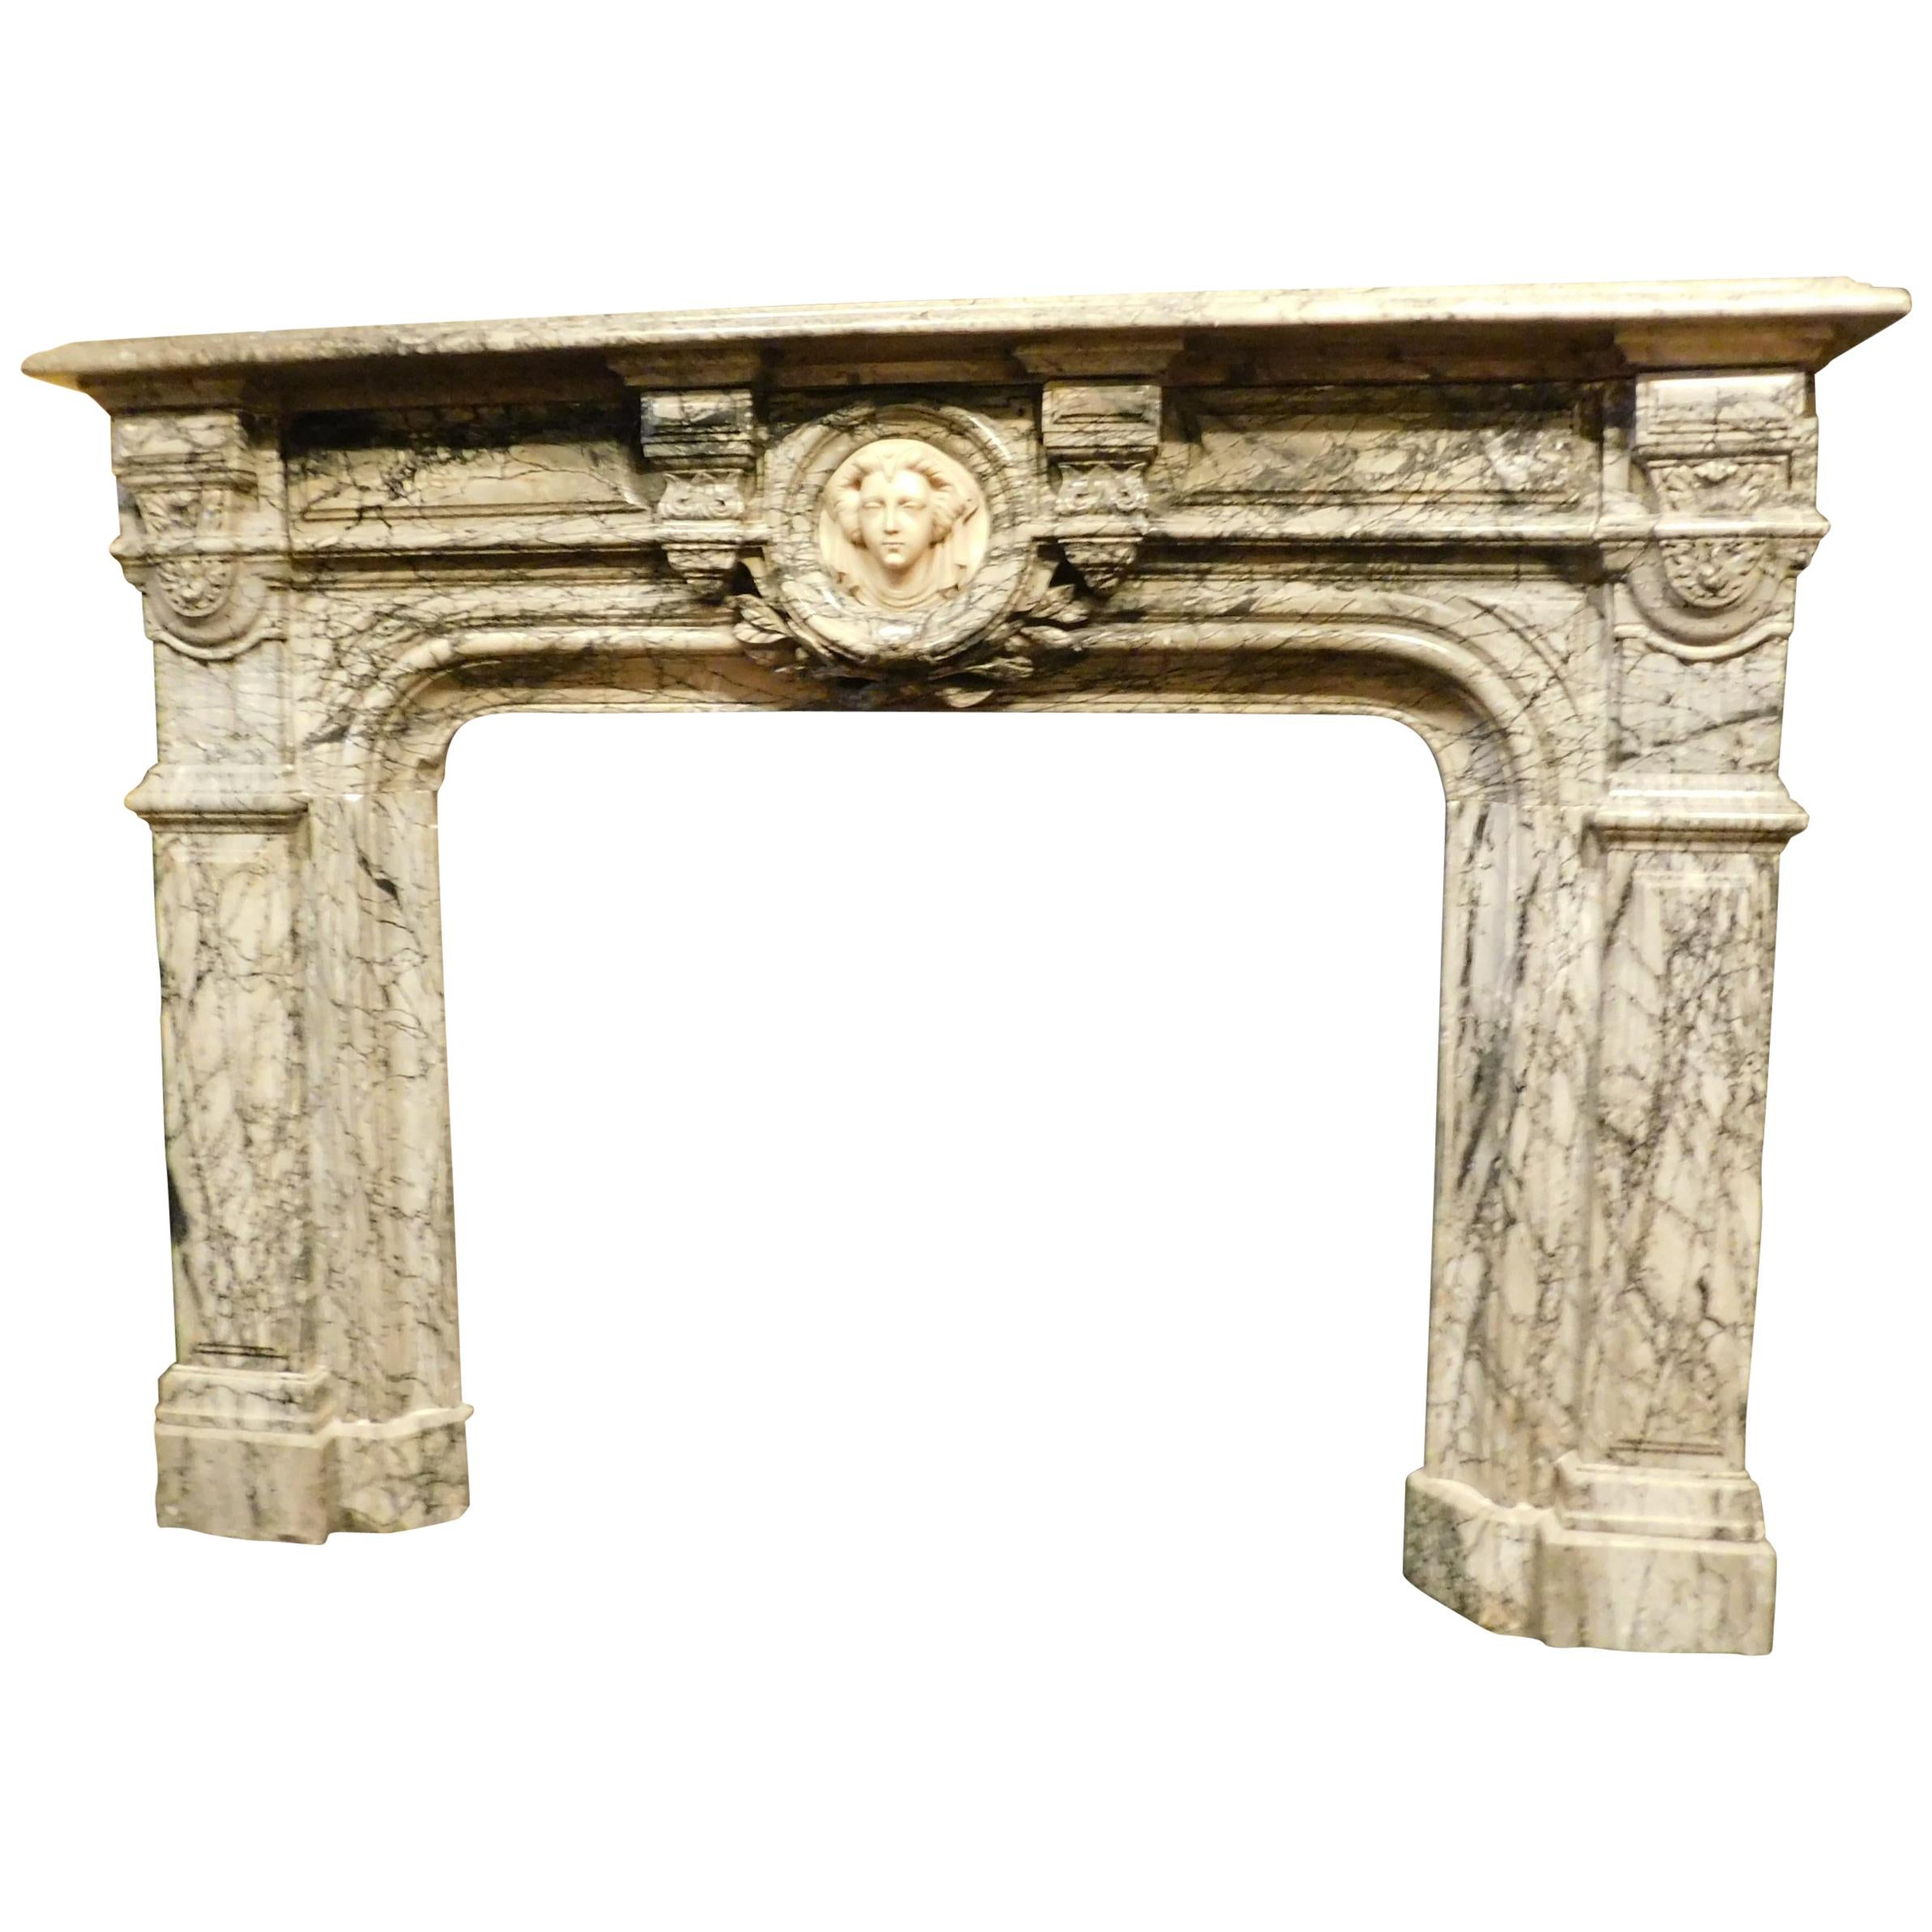 Antique Neoclassical Gray Marble Fireplace with a White Carrara Face, 1800 Italy